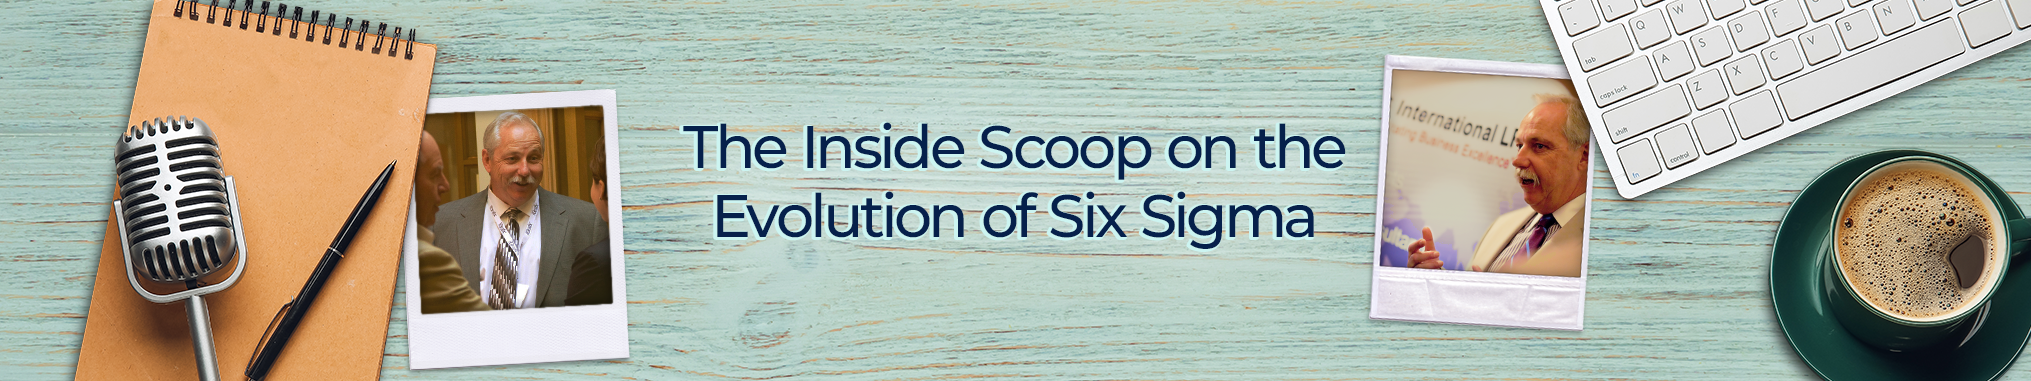 The Inside Scoop on the Evolution of Six Sigma